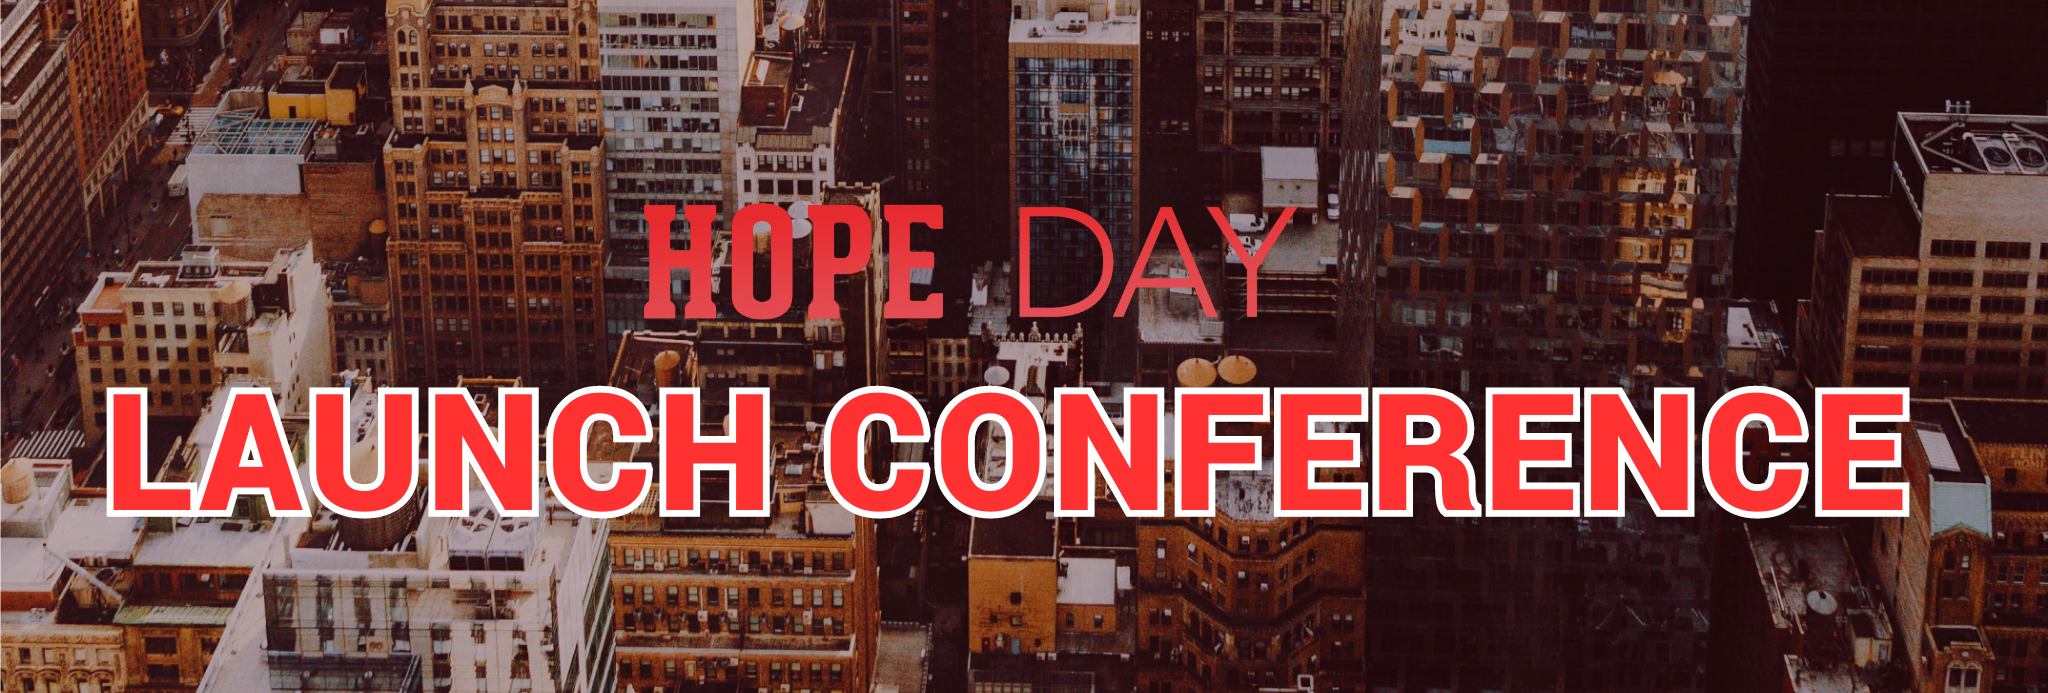 hope day launch conference